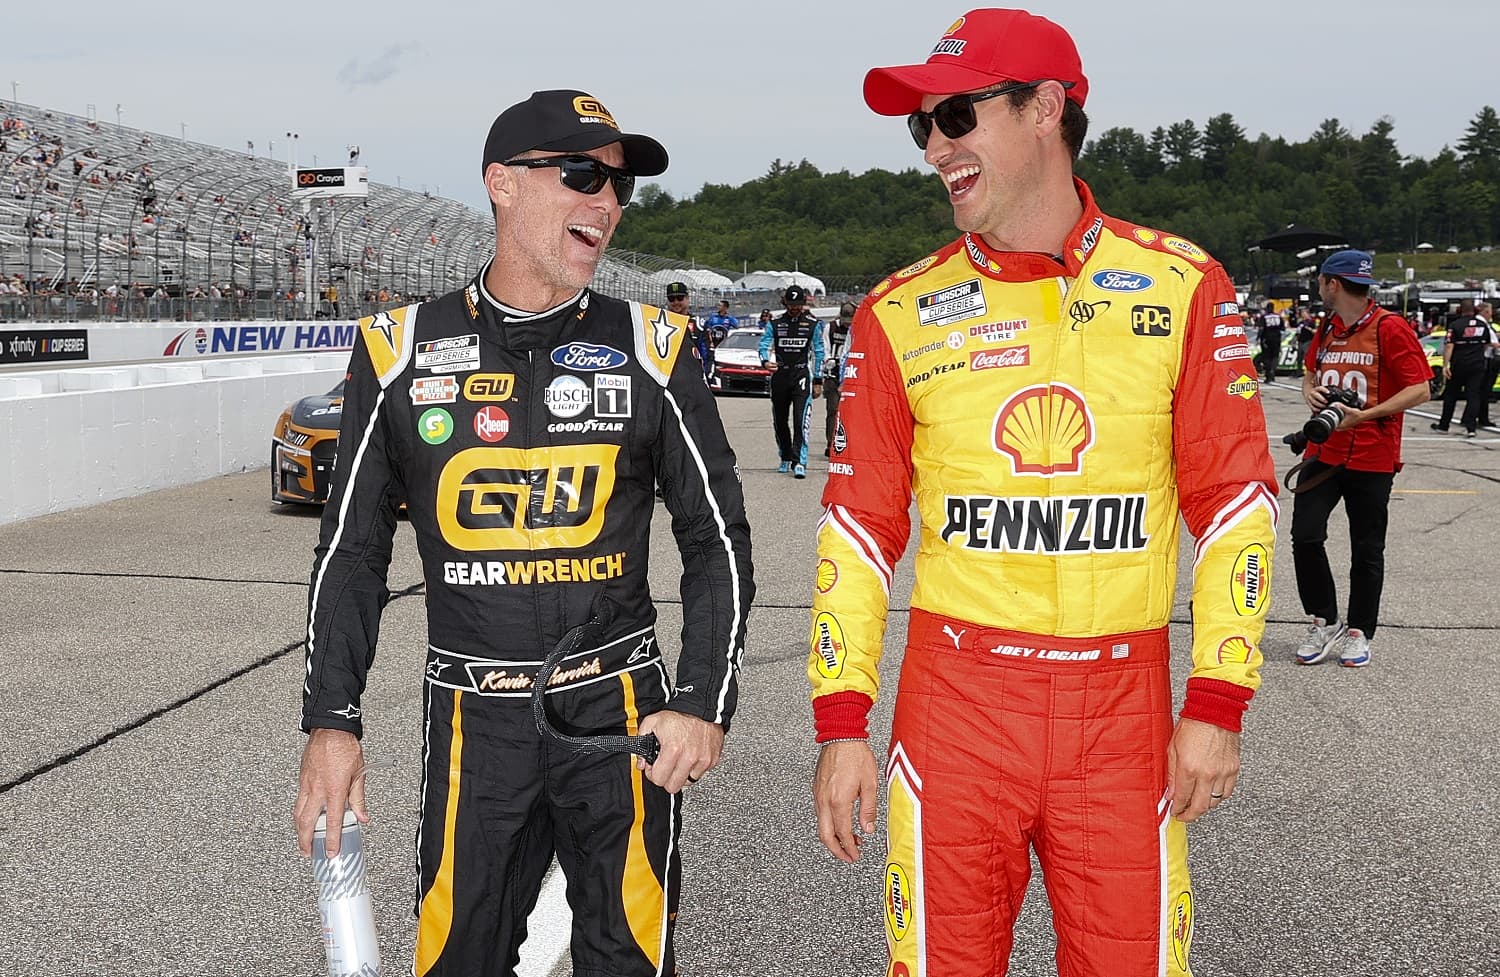 Kevin Harvick and Joey Logano walk the grid during qualifying for the NASCAR Cup Series Ambetter 301 at New Hampshire Motor Speedway on July 16, 2022. | Tim Nwachukwu/Getty Images